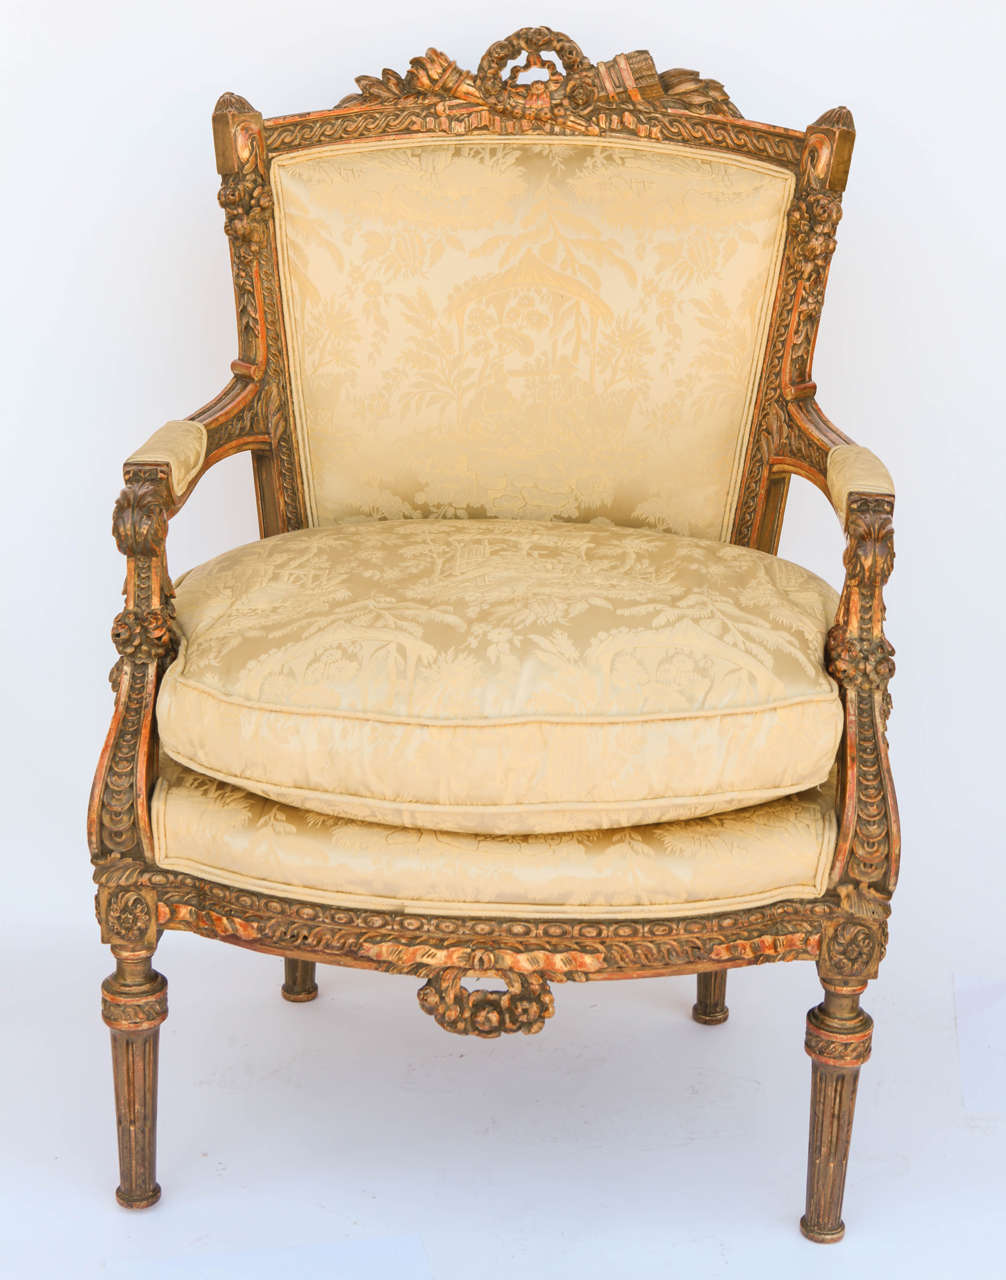 A pair of very fine 19th century French walnut armchairs upholstered in silk damask.